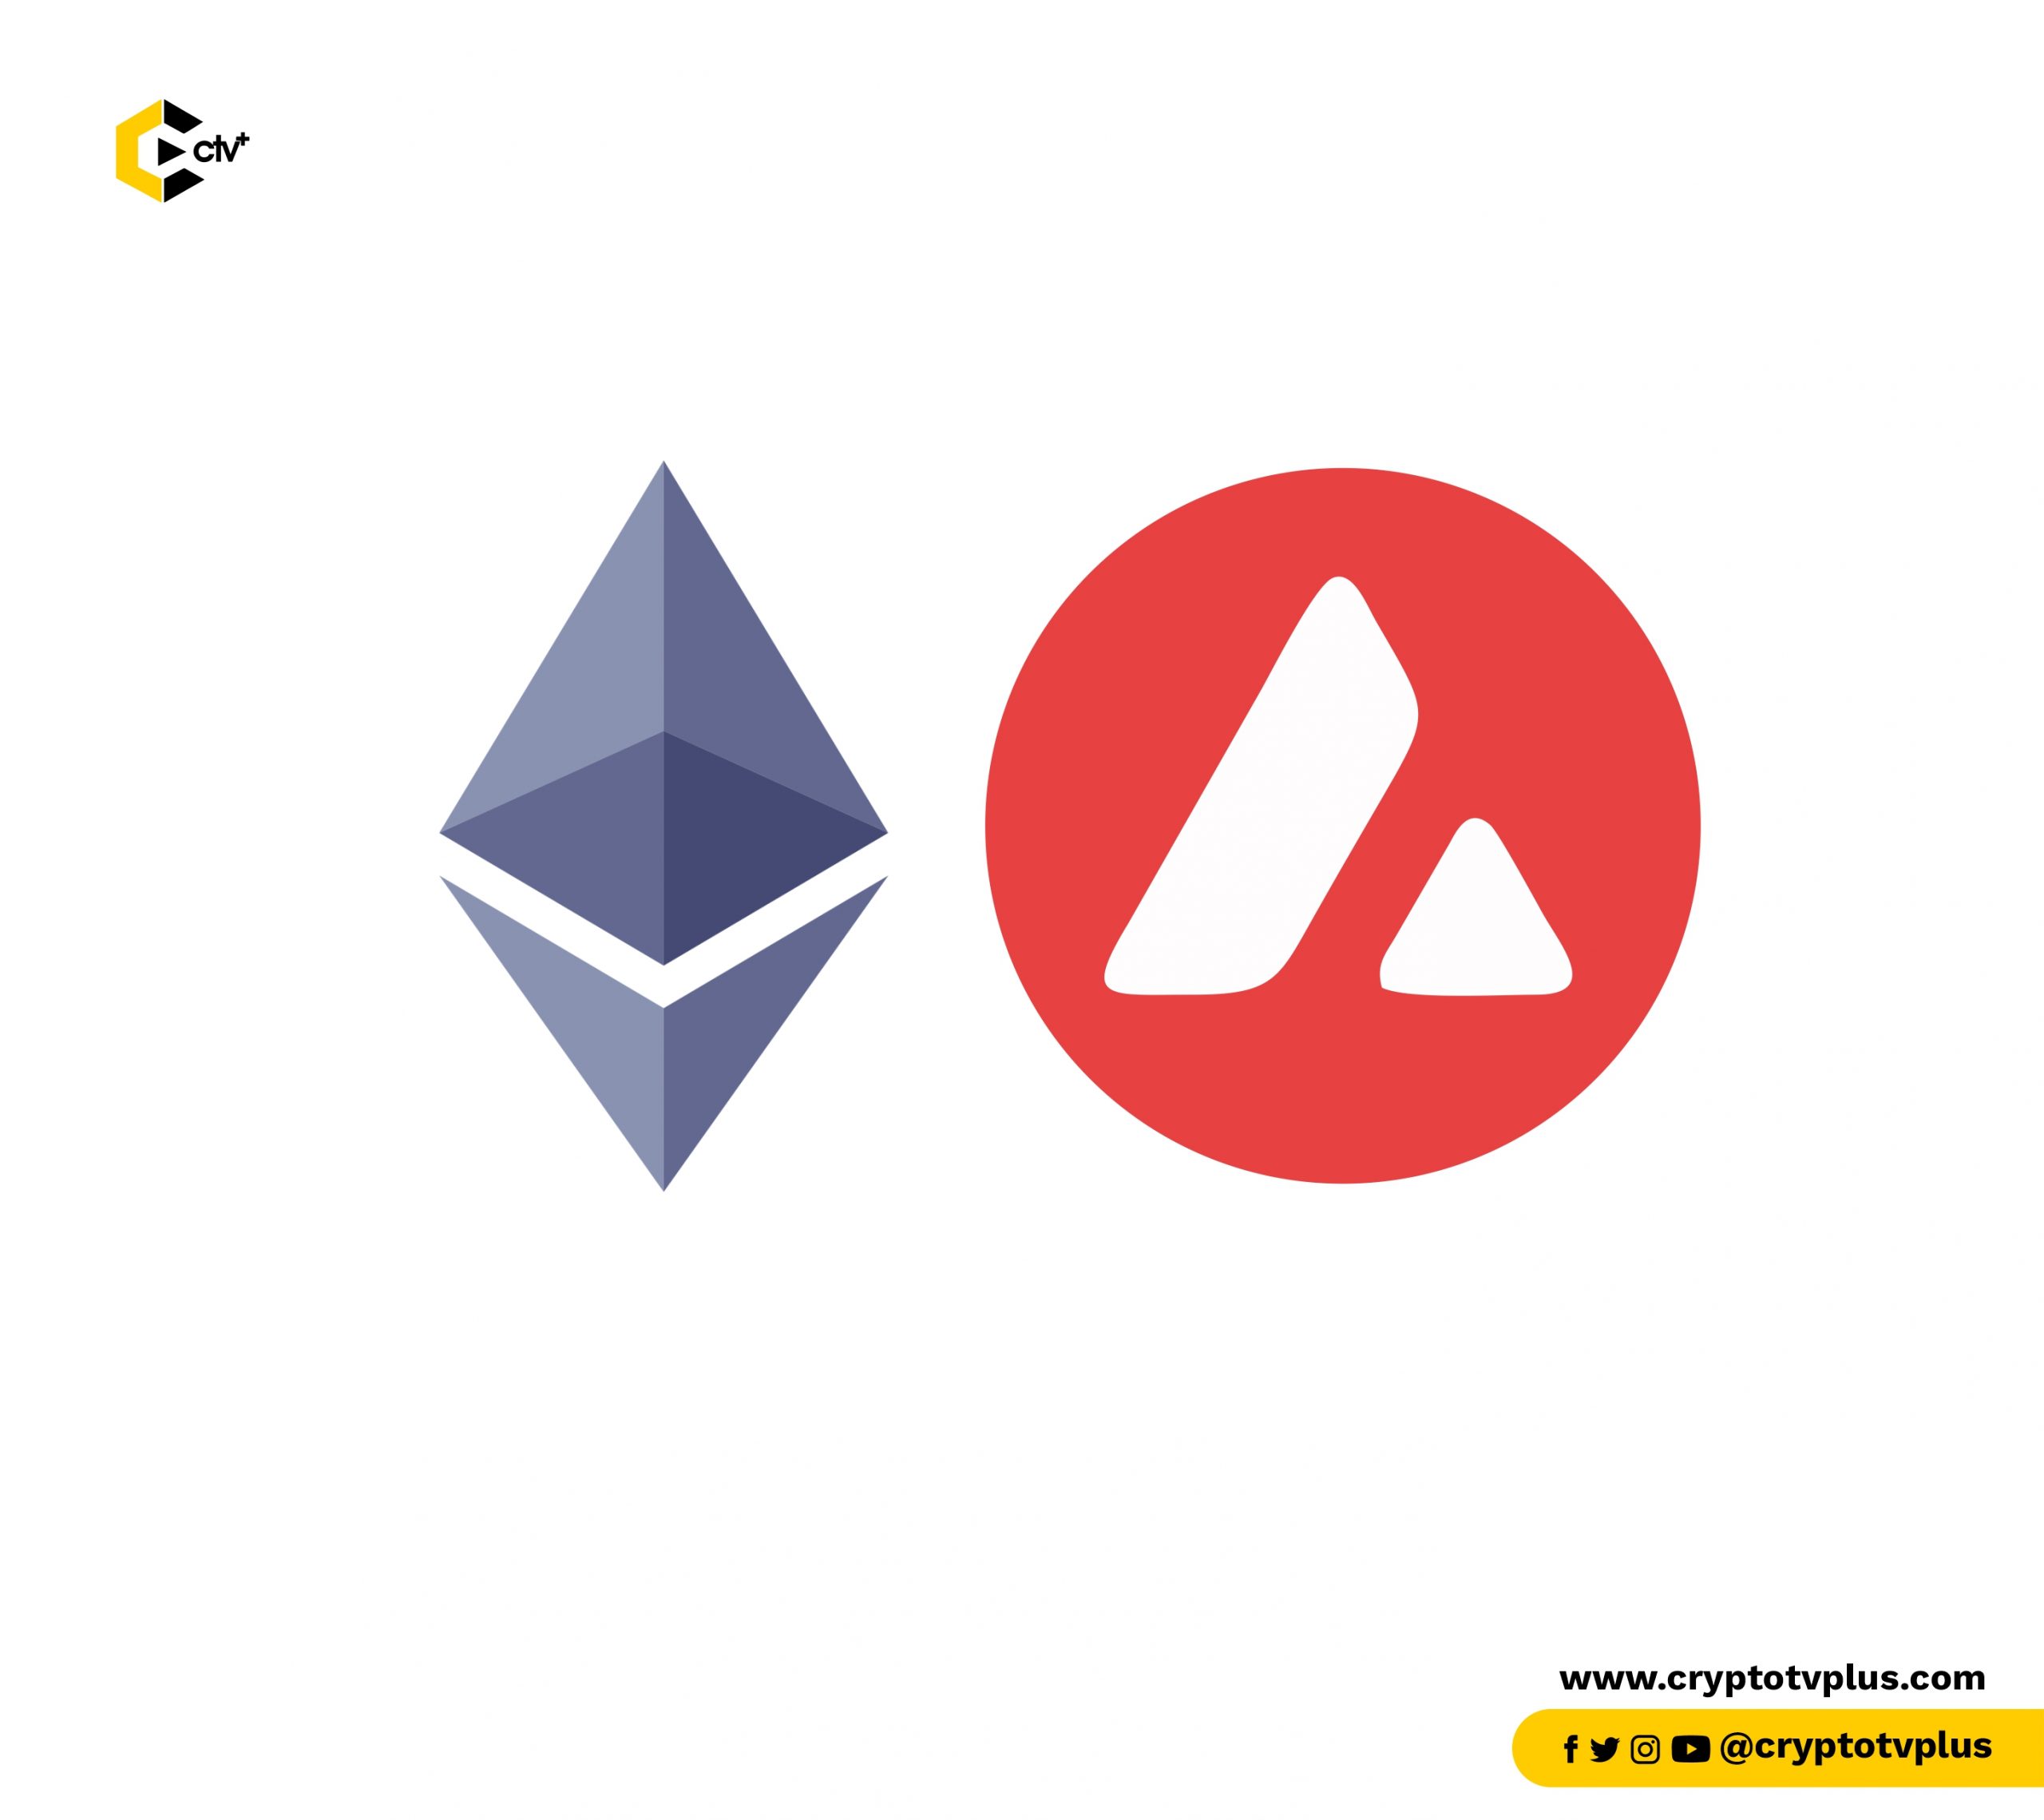 Will Avalanche Ever Overtake Ethereum?

